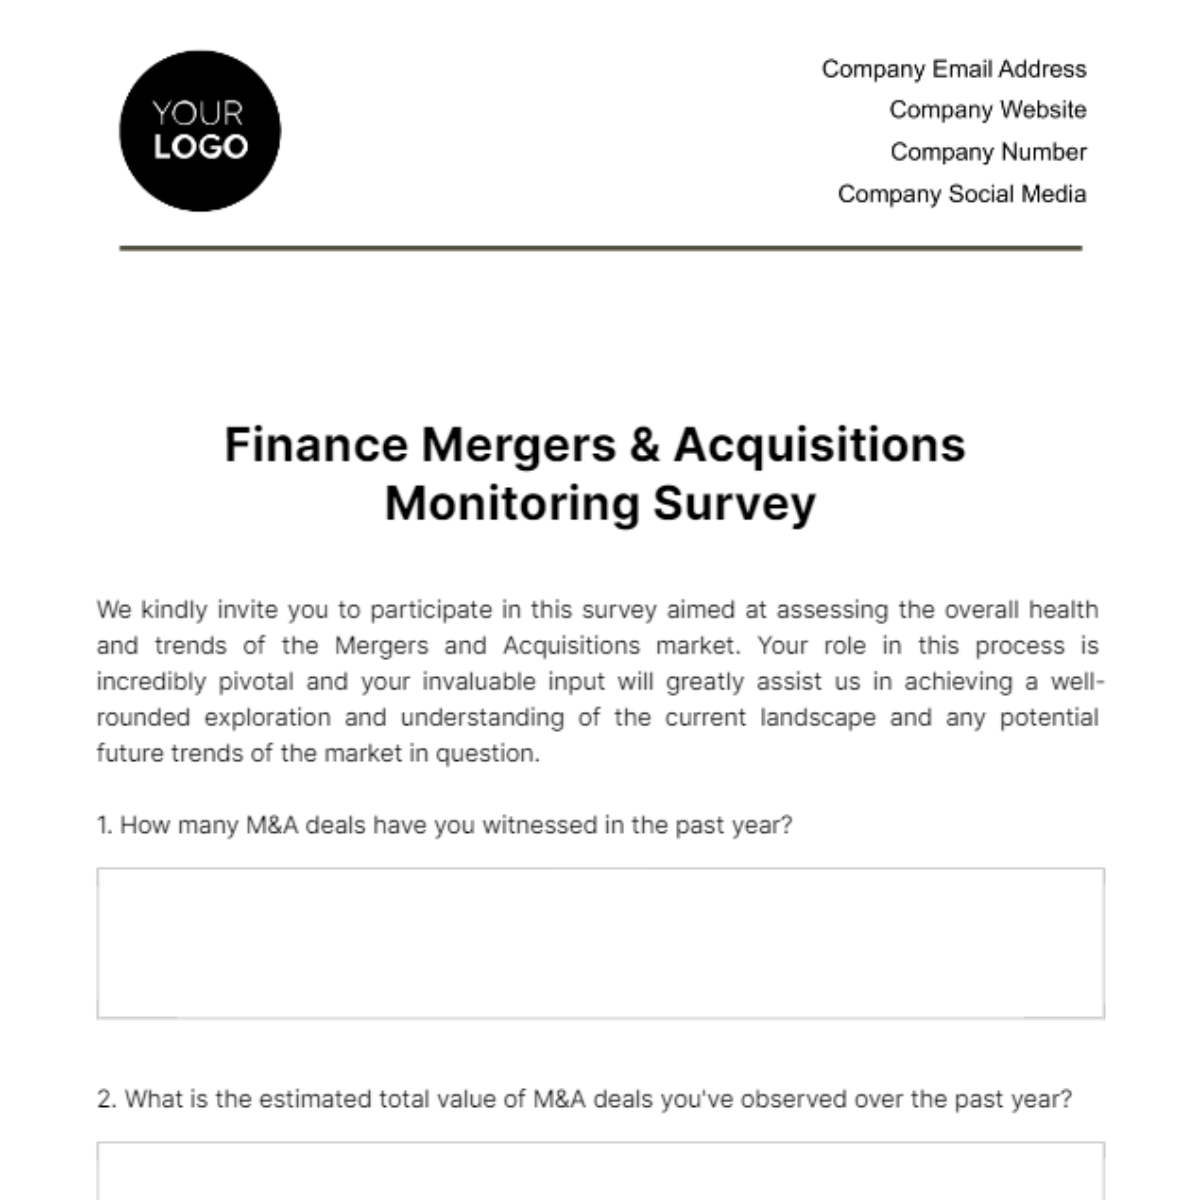 Finance Mergers & Acquisitions Monitoring Survey Template